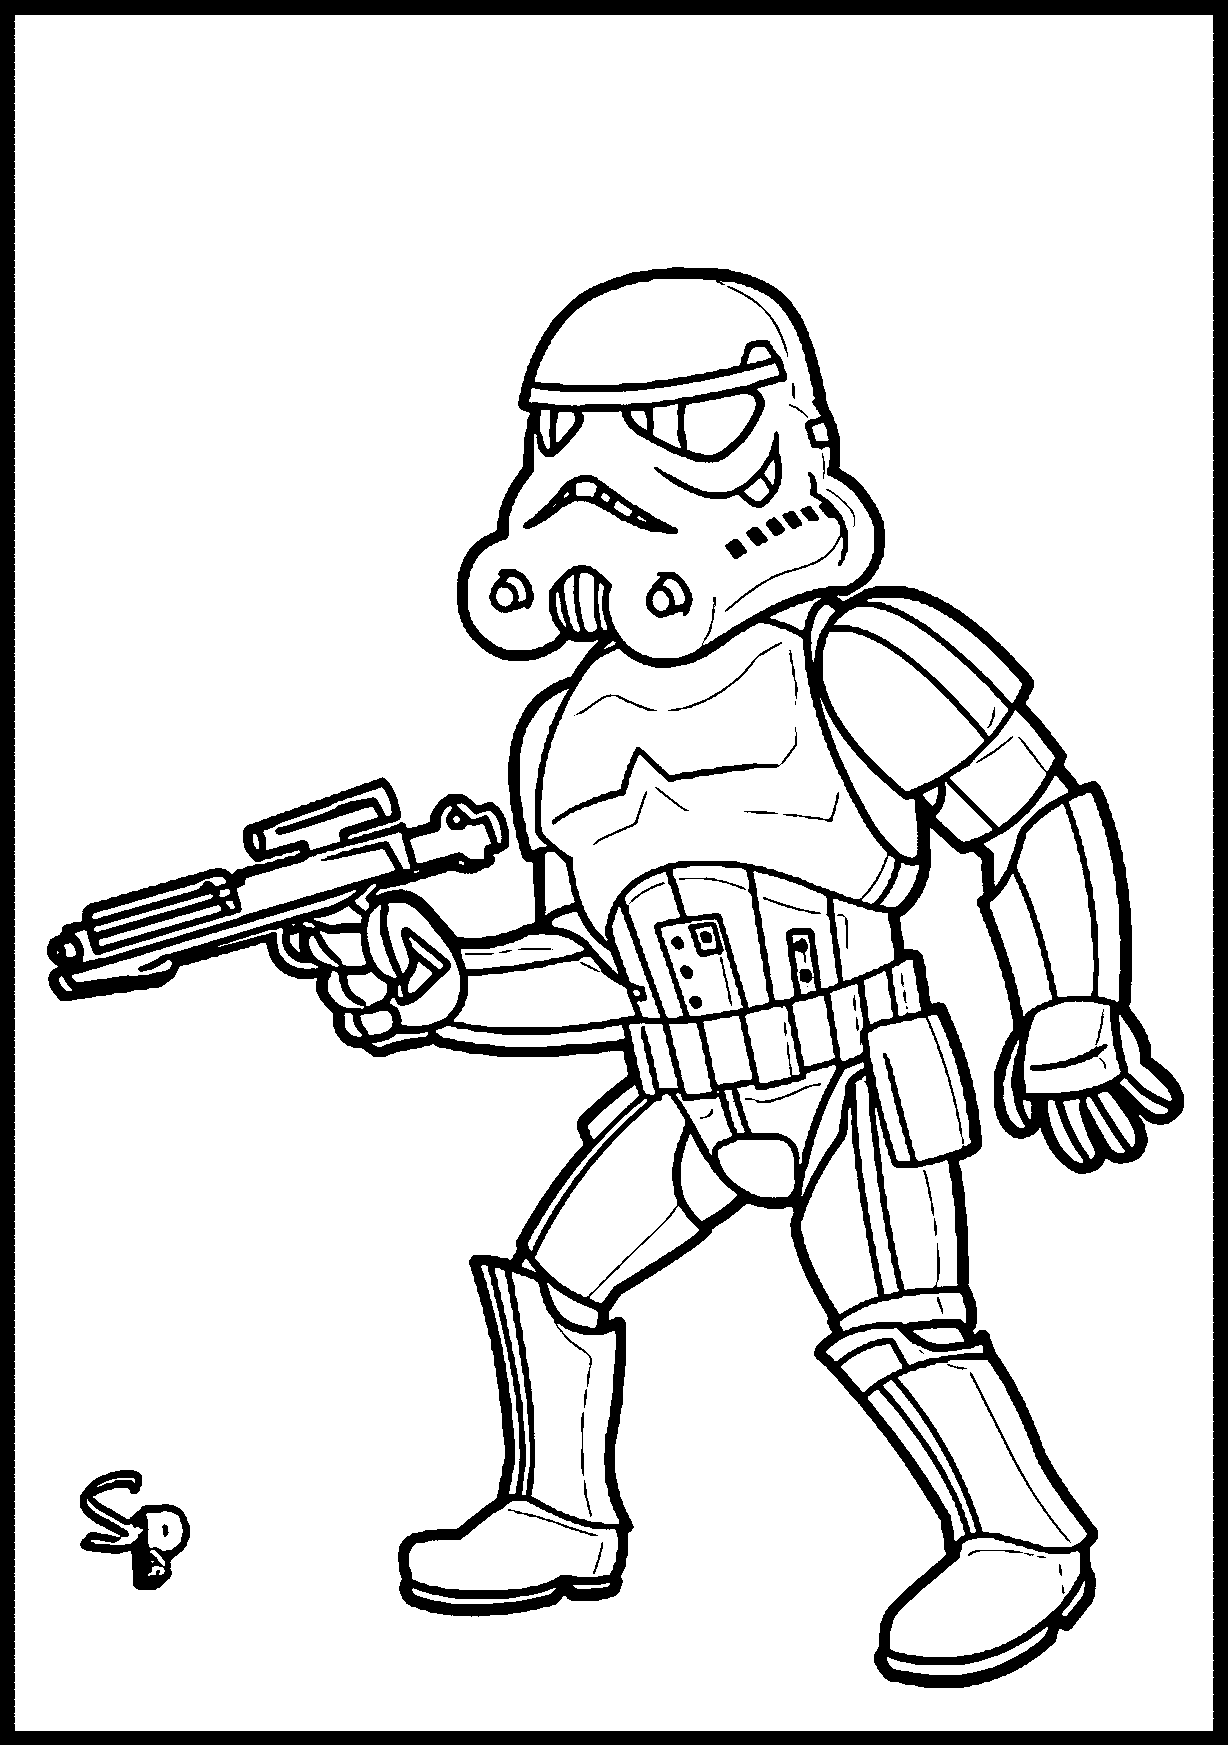 Star Wars Stormtrooper Coloring Page | Wecoloringpage